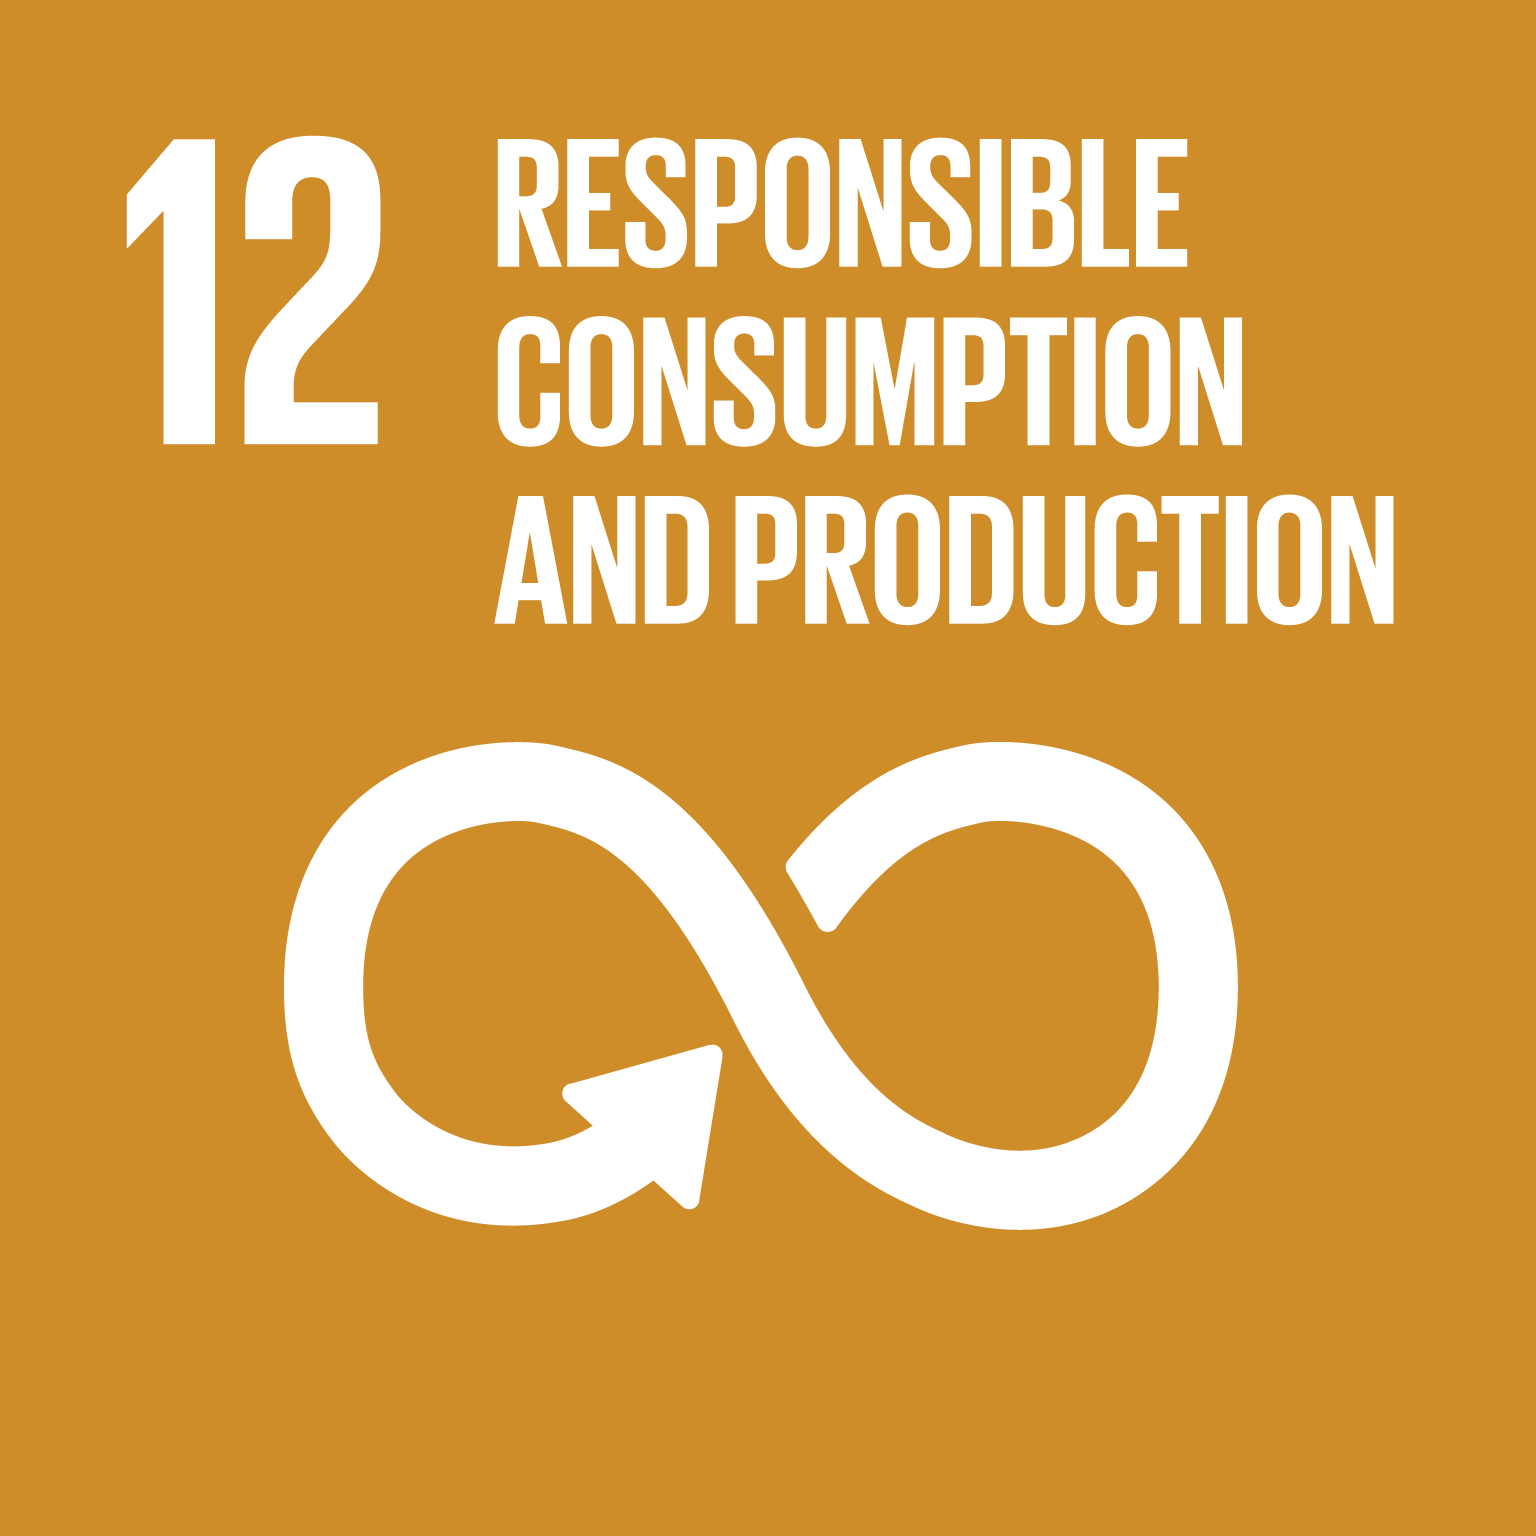 SDG - 12: Responsible consumption and production